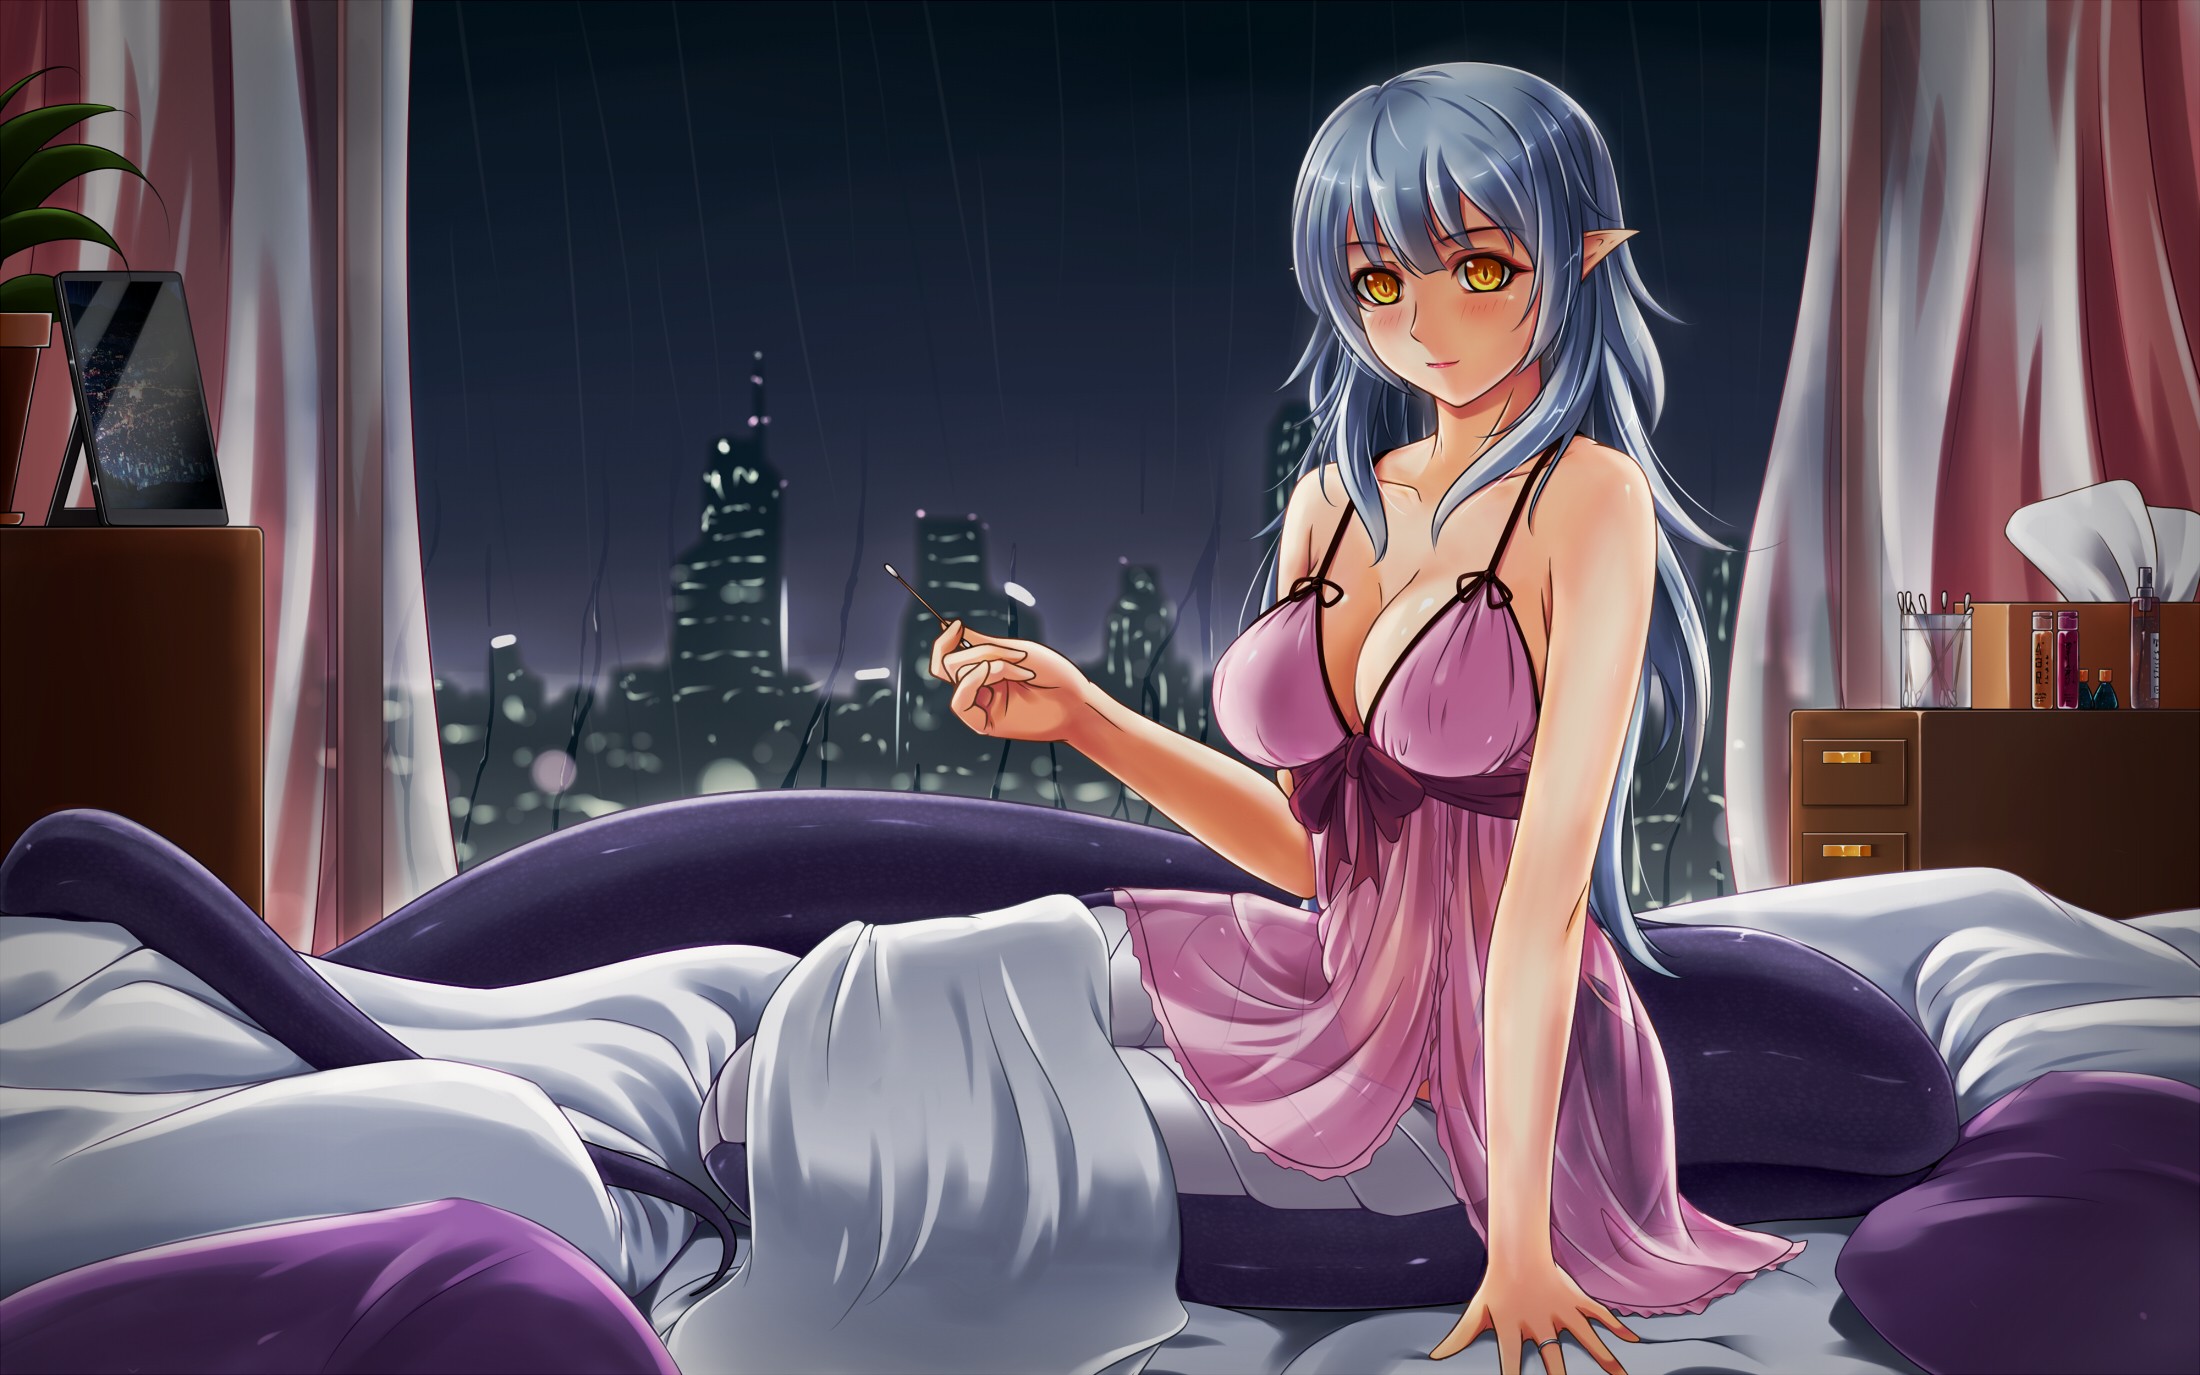 Pointed Ears Midnight Anime Girls Long Hair Lamia Lingerie Wallpaper 212196 2200x1375px